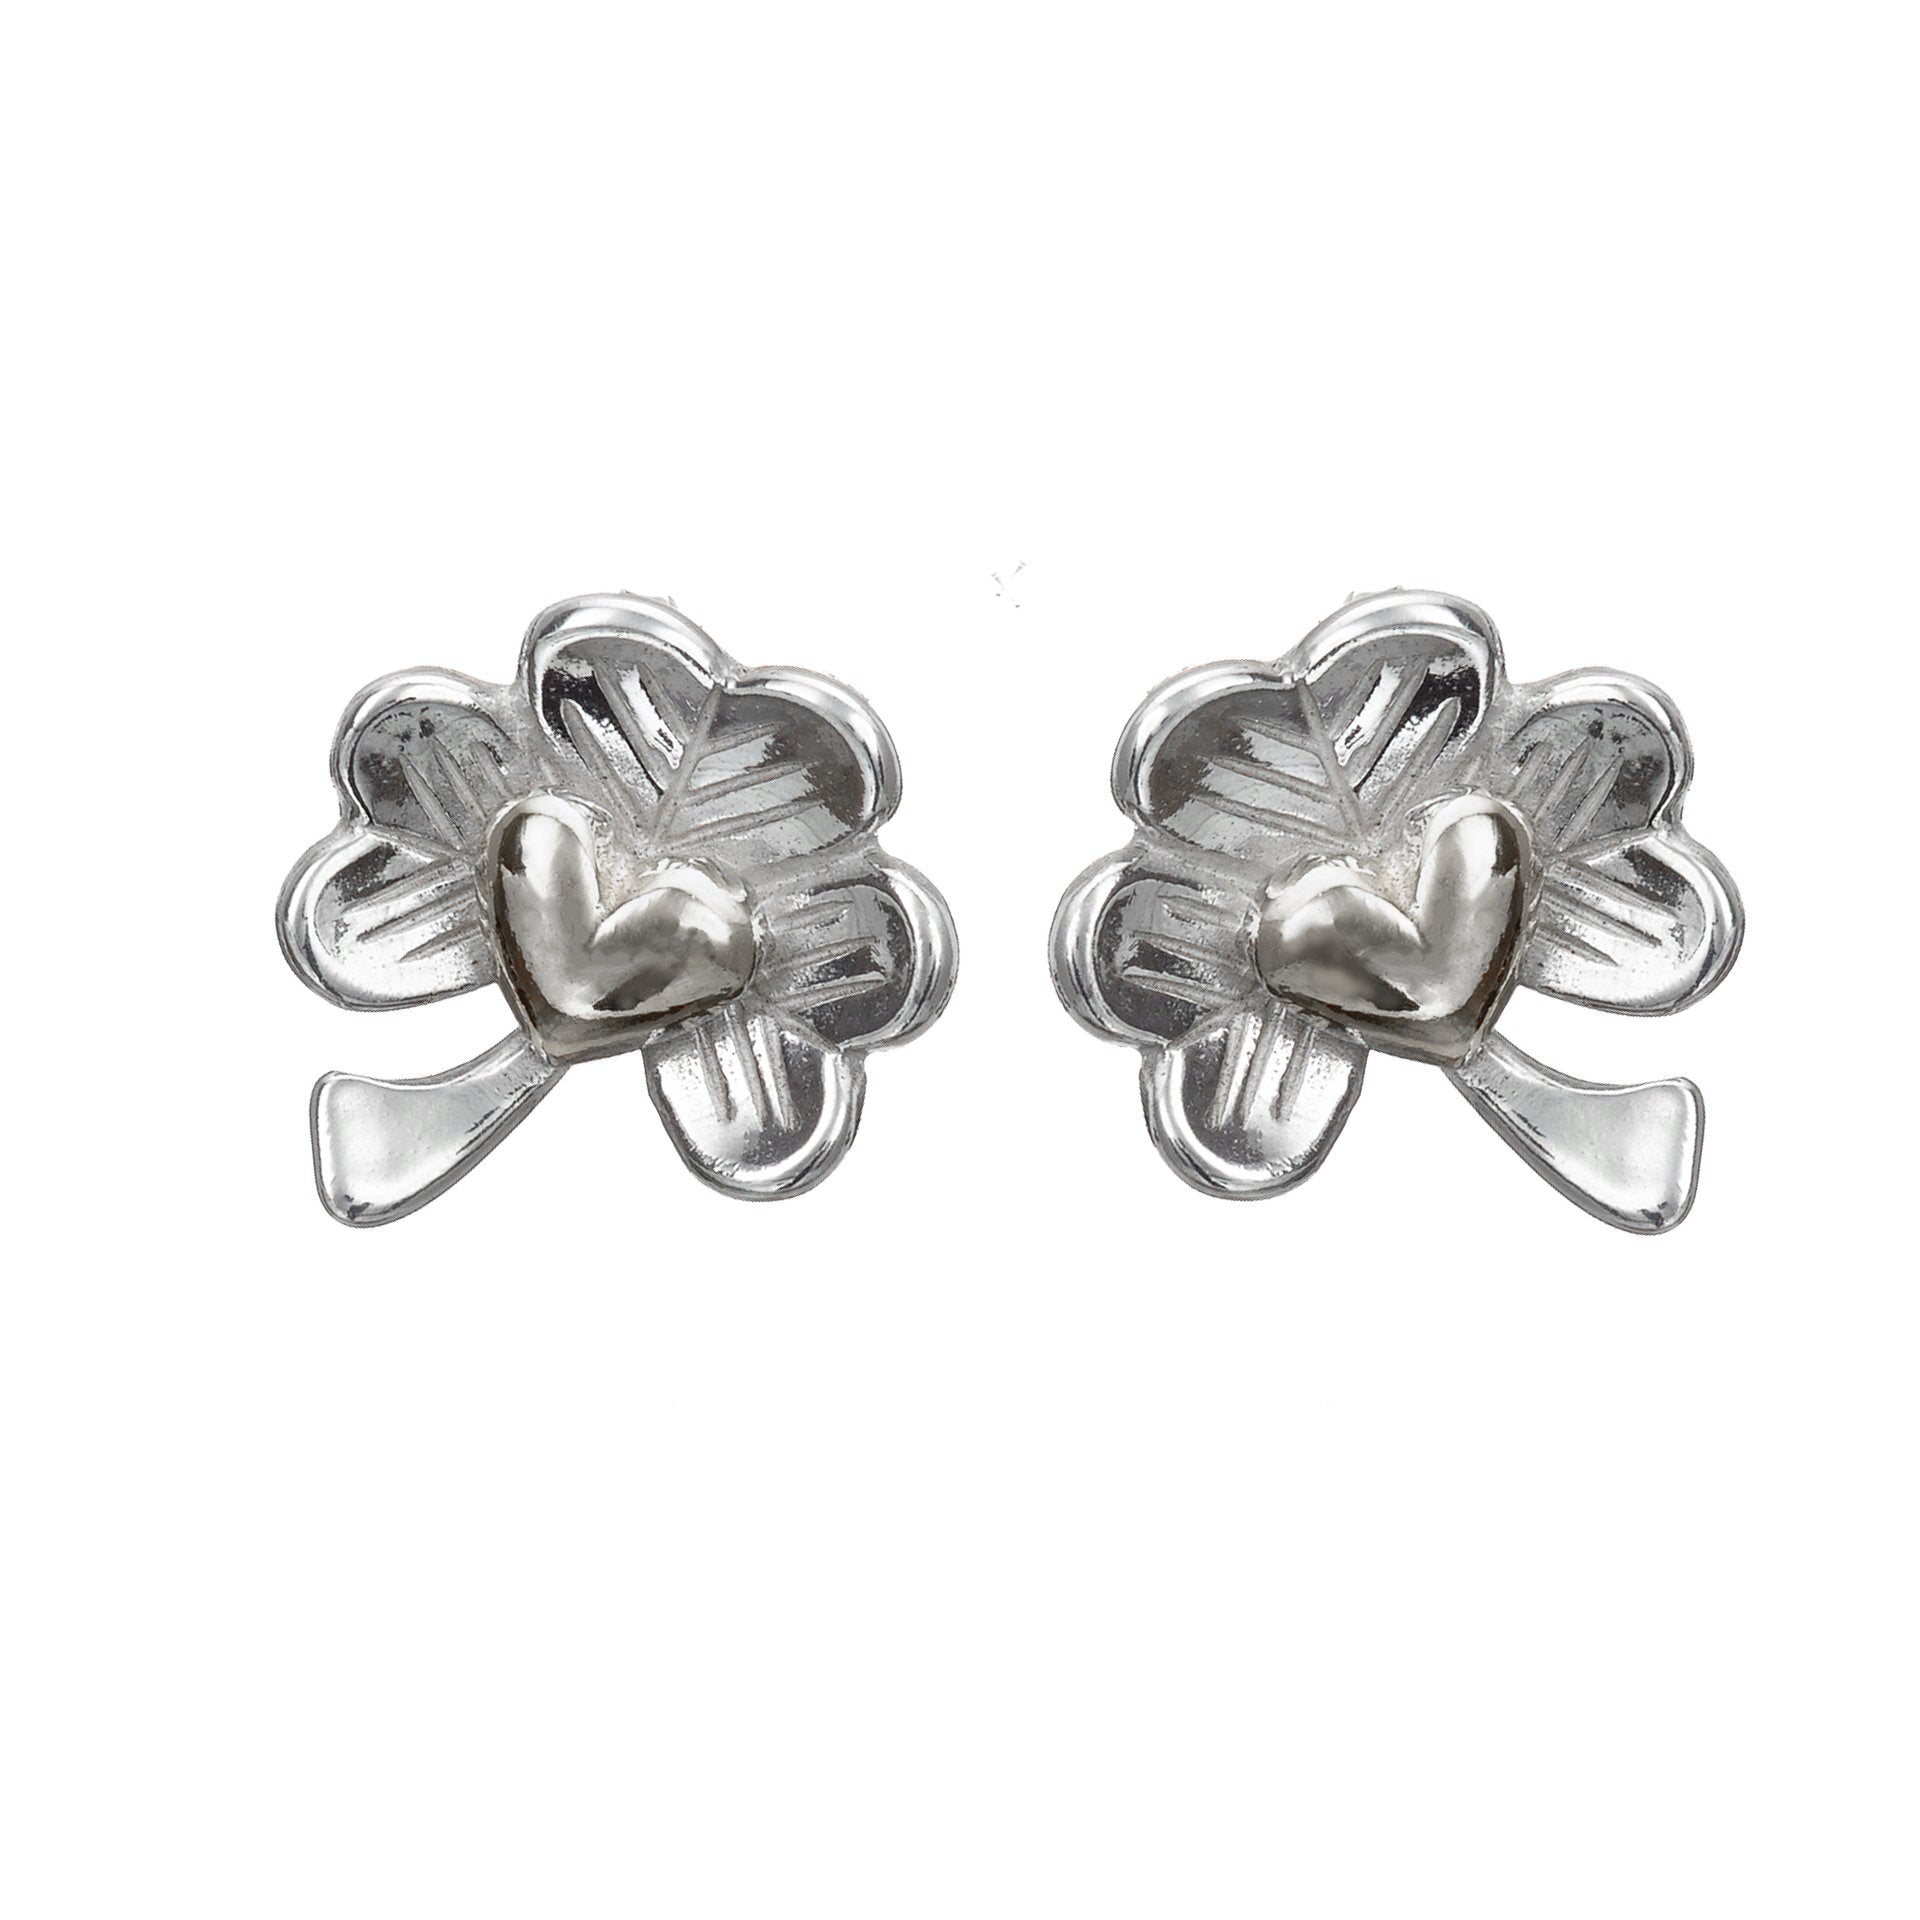 Love of Ireland Stud Earrings, Irish Design handcrafted from Sterling Silver